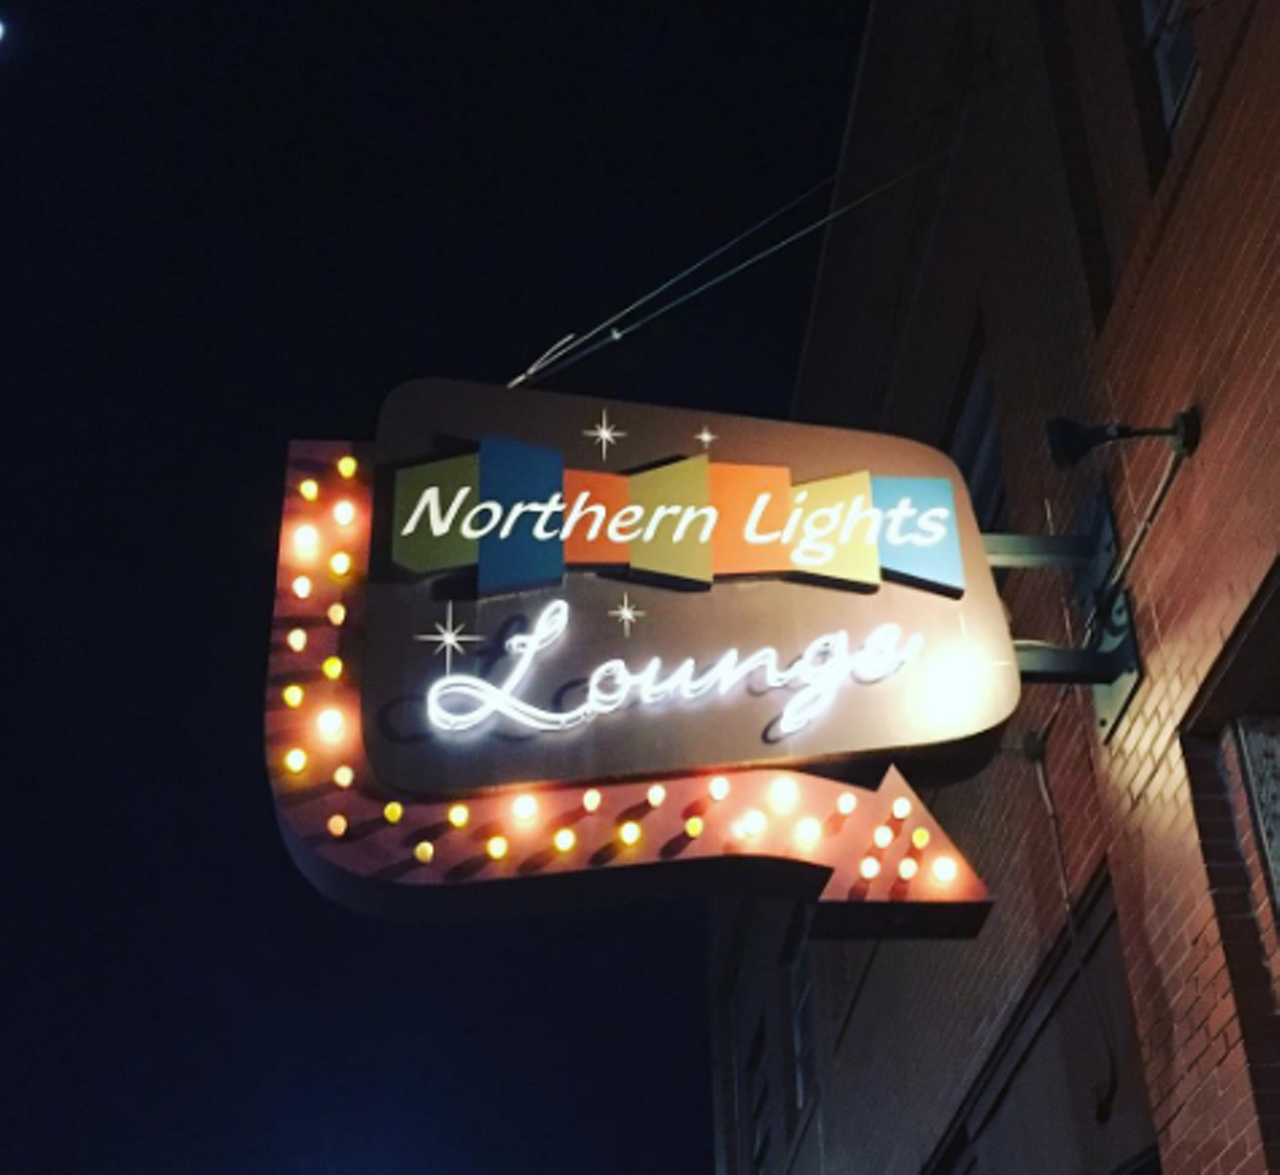 Northern Lights Lounge, 660 W Baltimore St., Detroit
Photo via IG @gingerconfessions